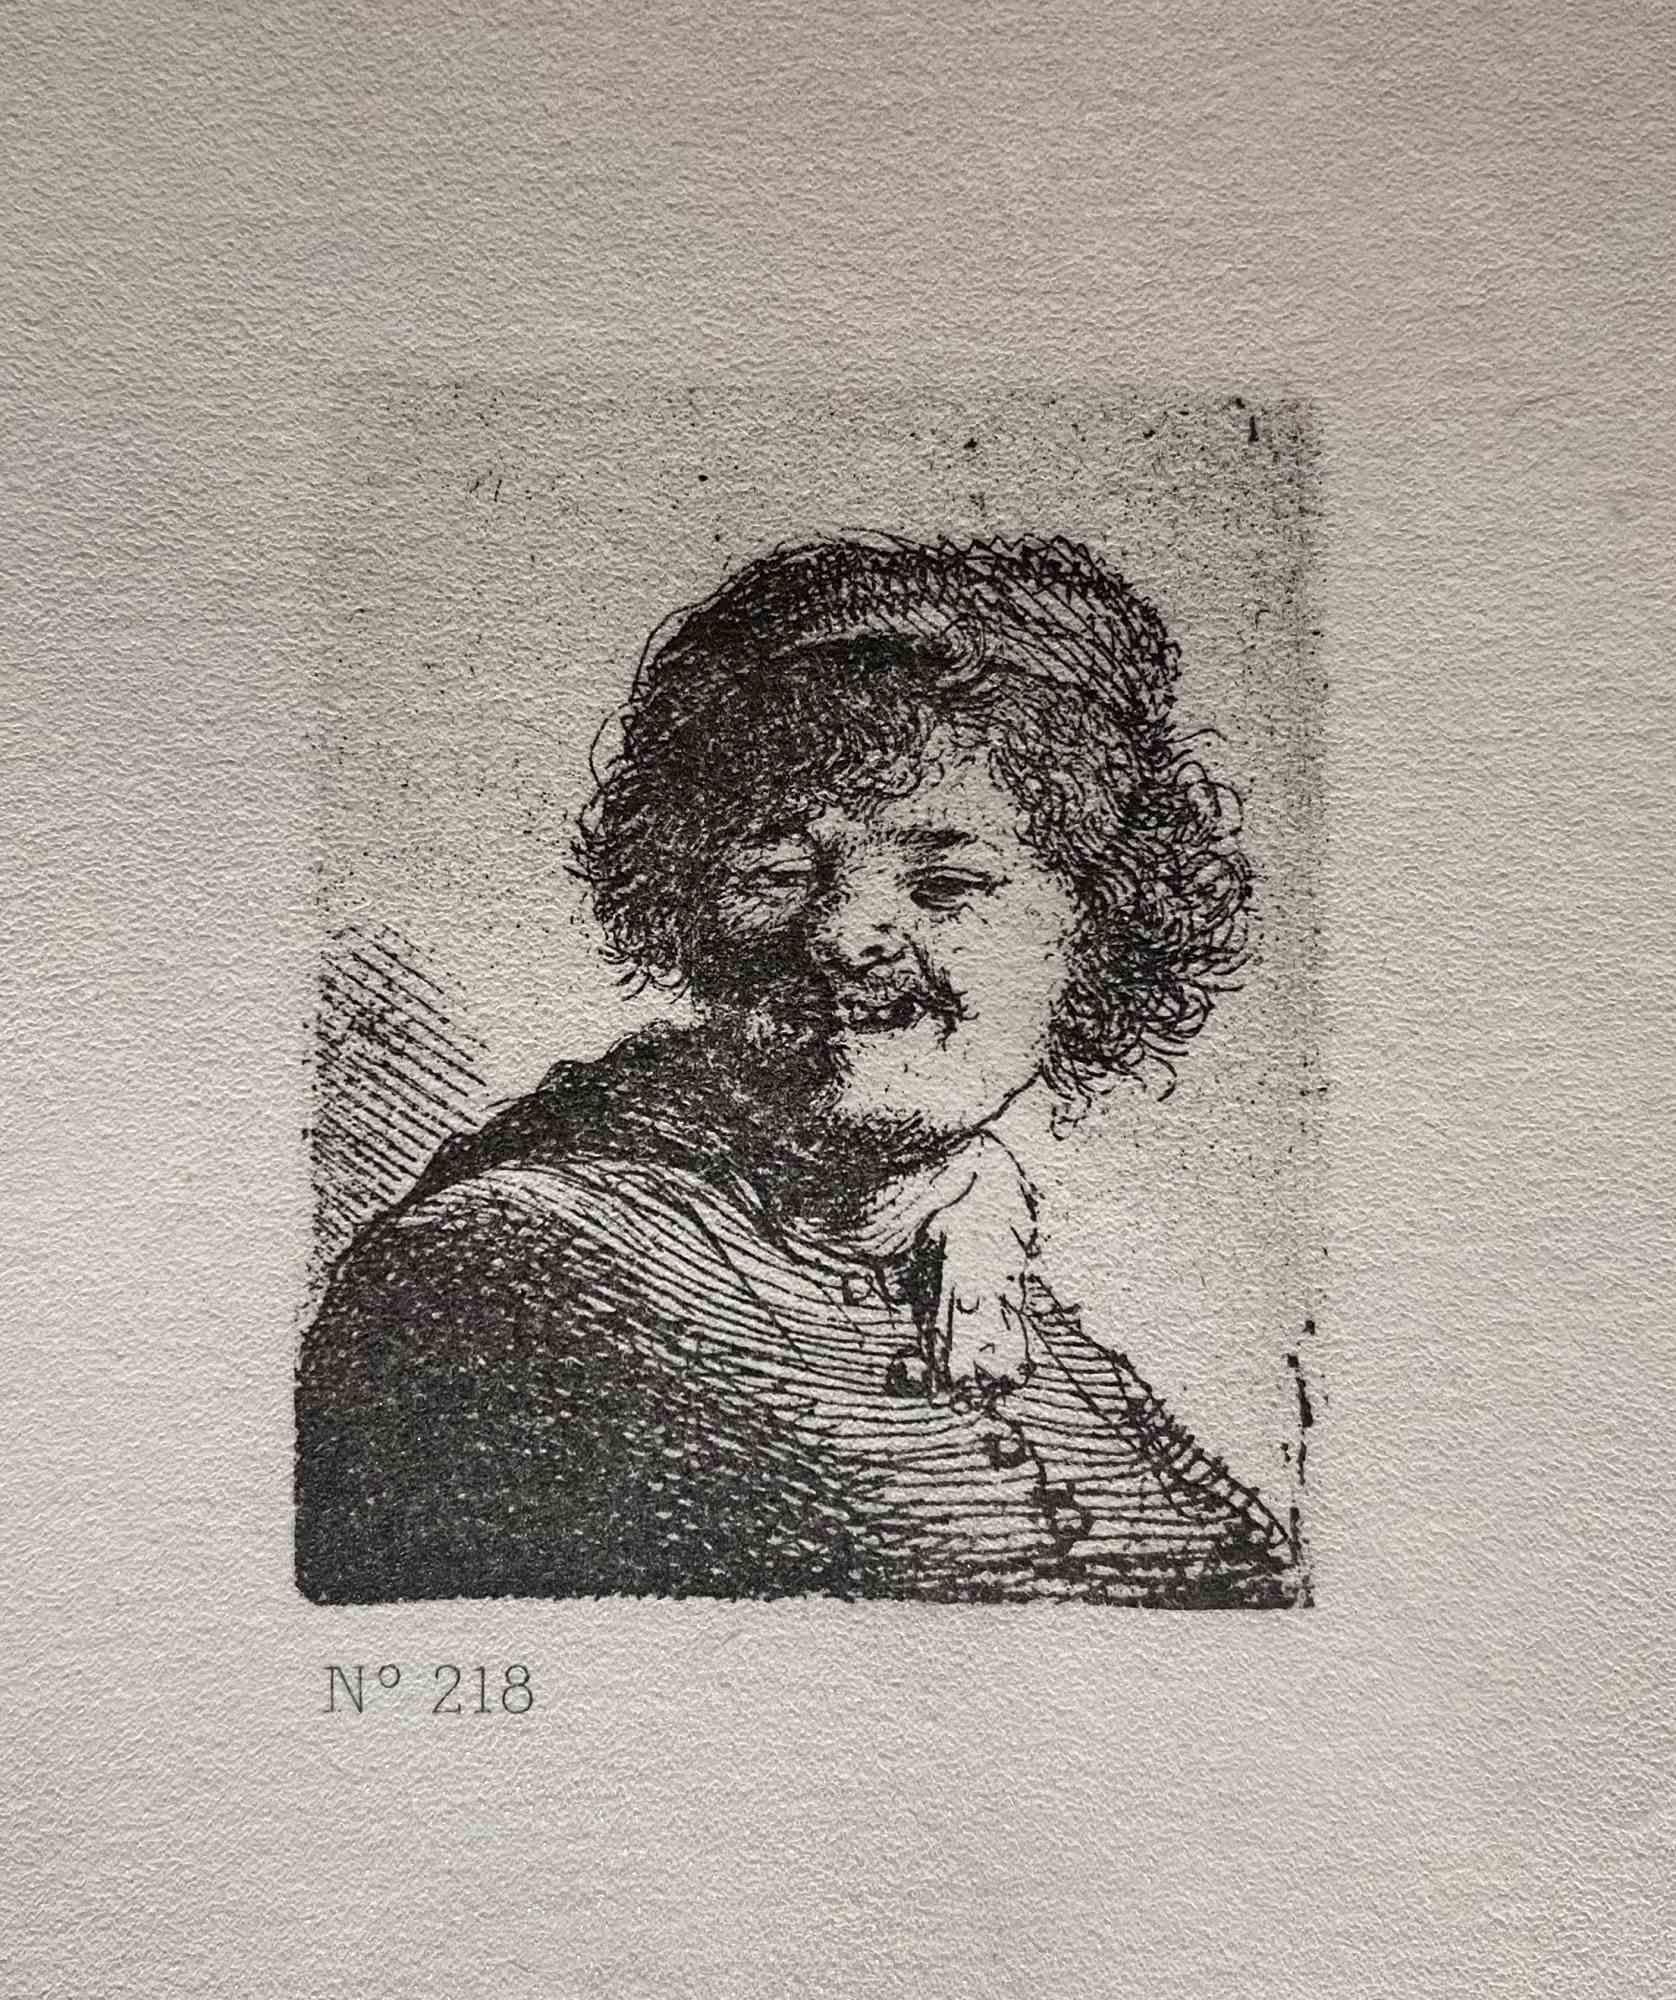 Charles Amand Durand Portrait Print - Self-Portrait in a Cap, Laughing - Engraving after Rembrandt - 19th Century